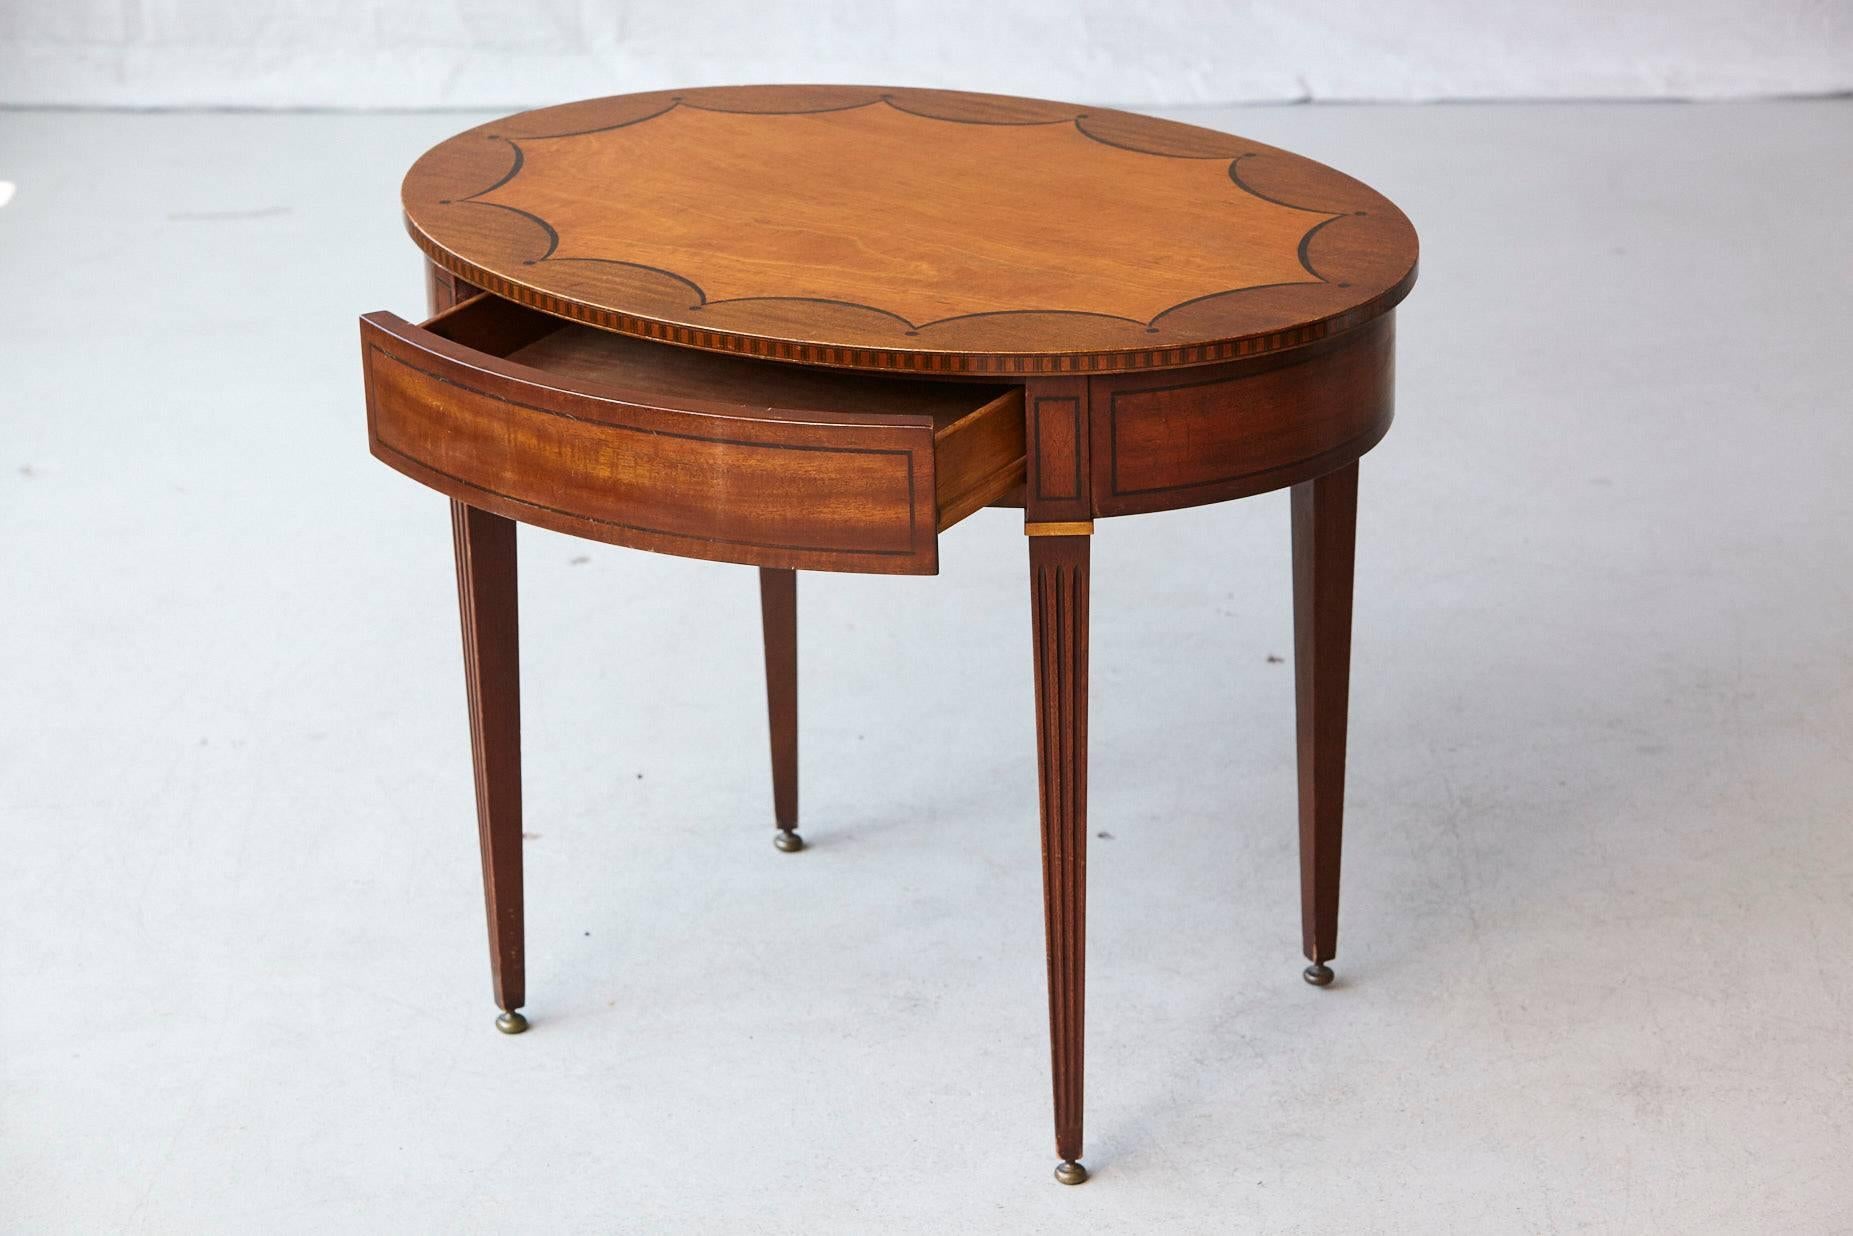 Oval side table with one hidden drawer and graphic marquetry around the apron and the top of the table, raised on tapered legs with brass feed. 
The table has a few scratches and dings to the surface and legs, please refer to the detailed photos.